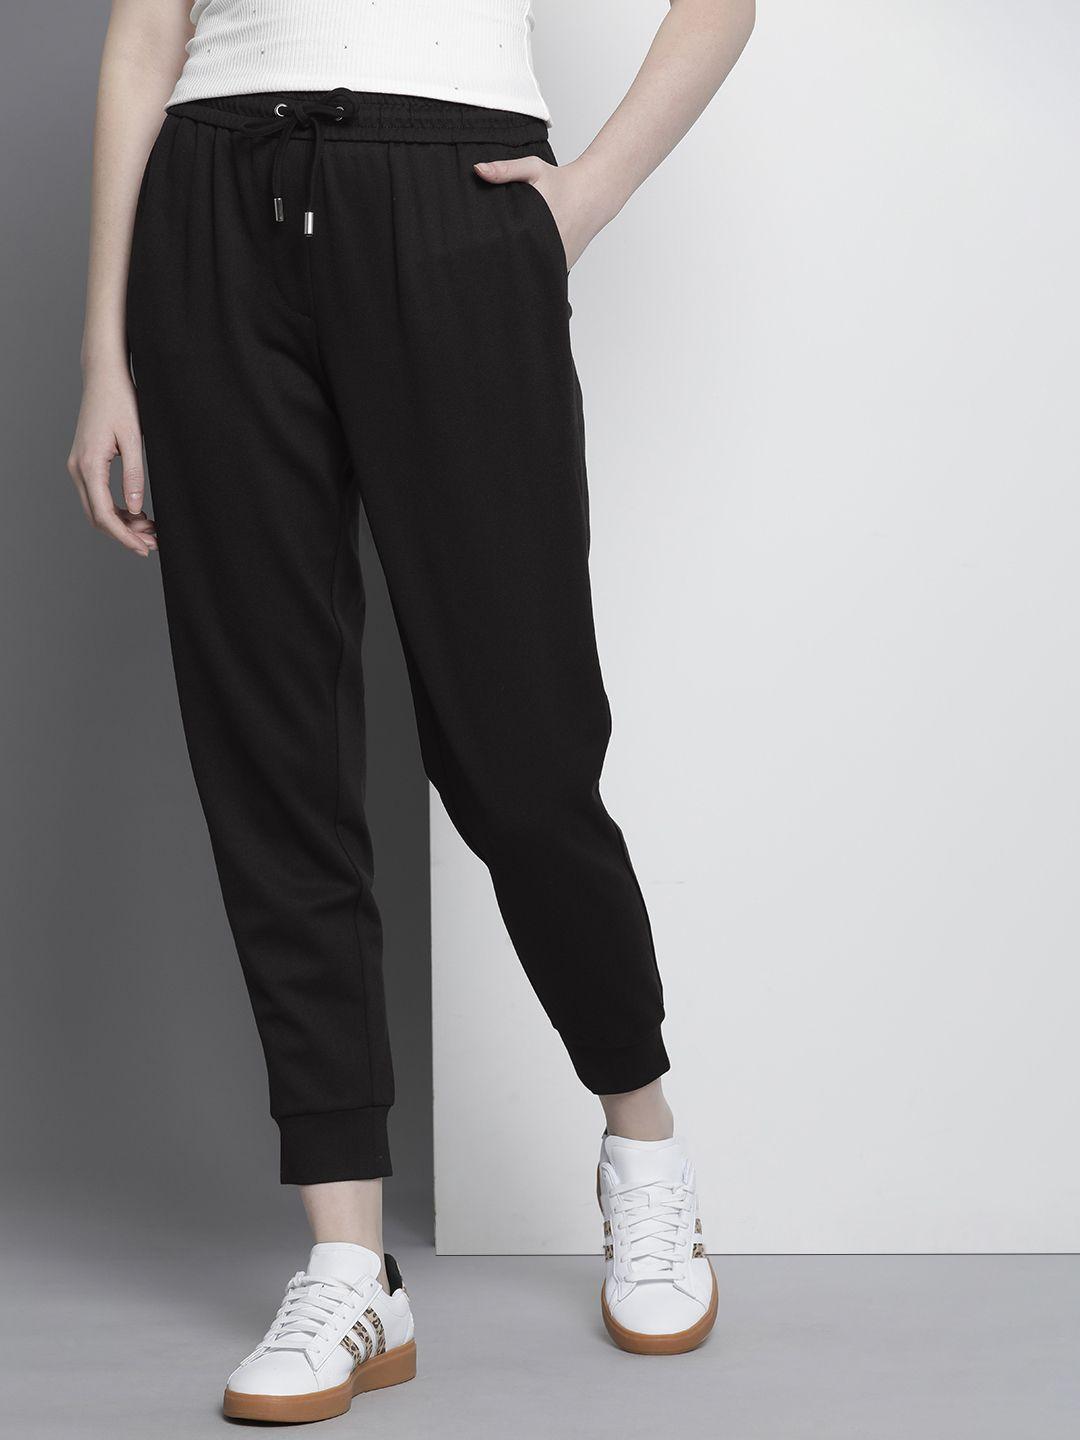 Tommy Hilfiger Women Solid Joggers